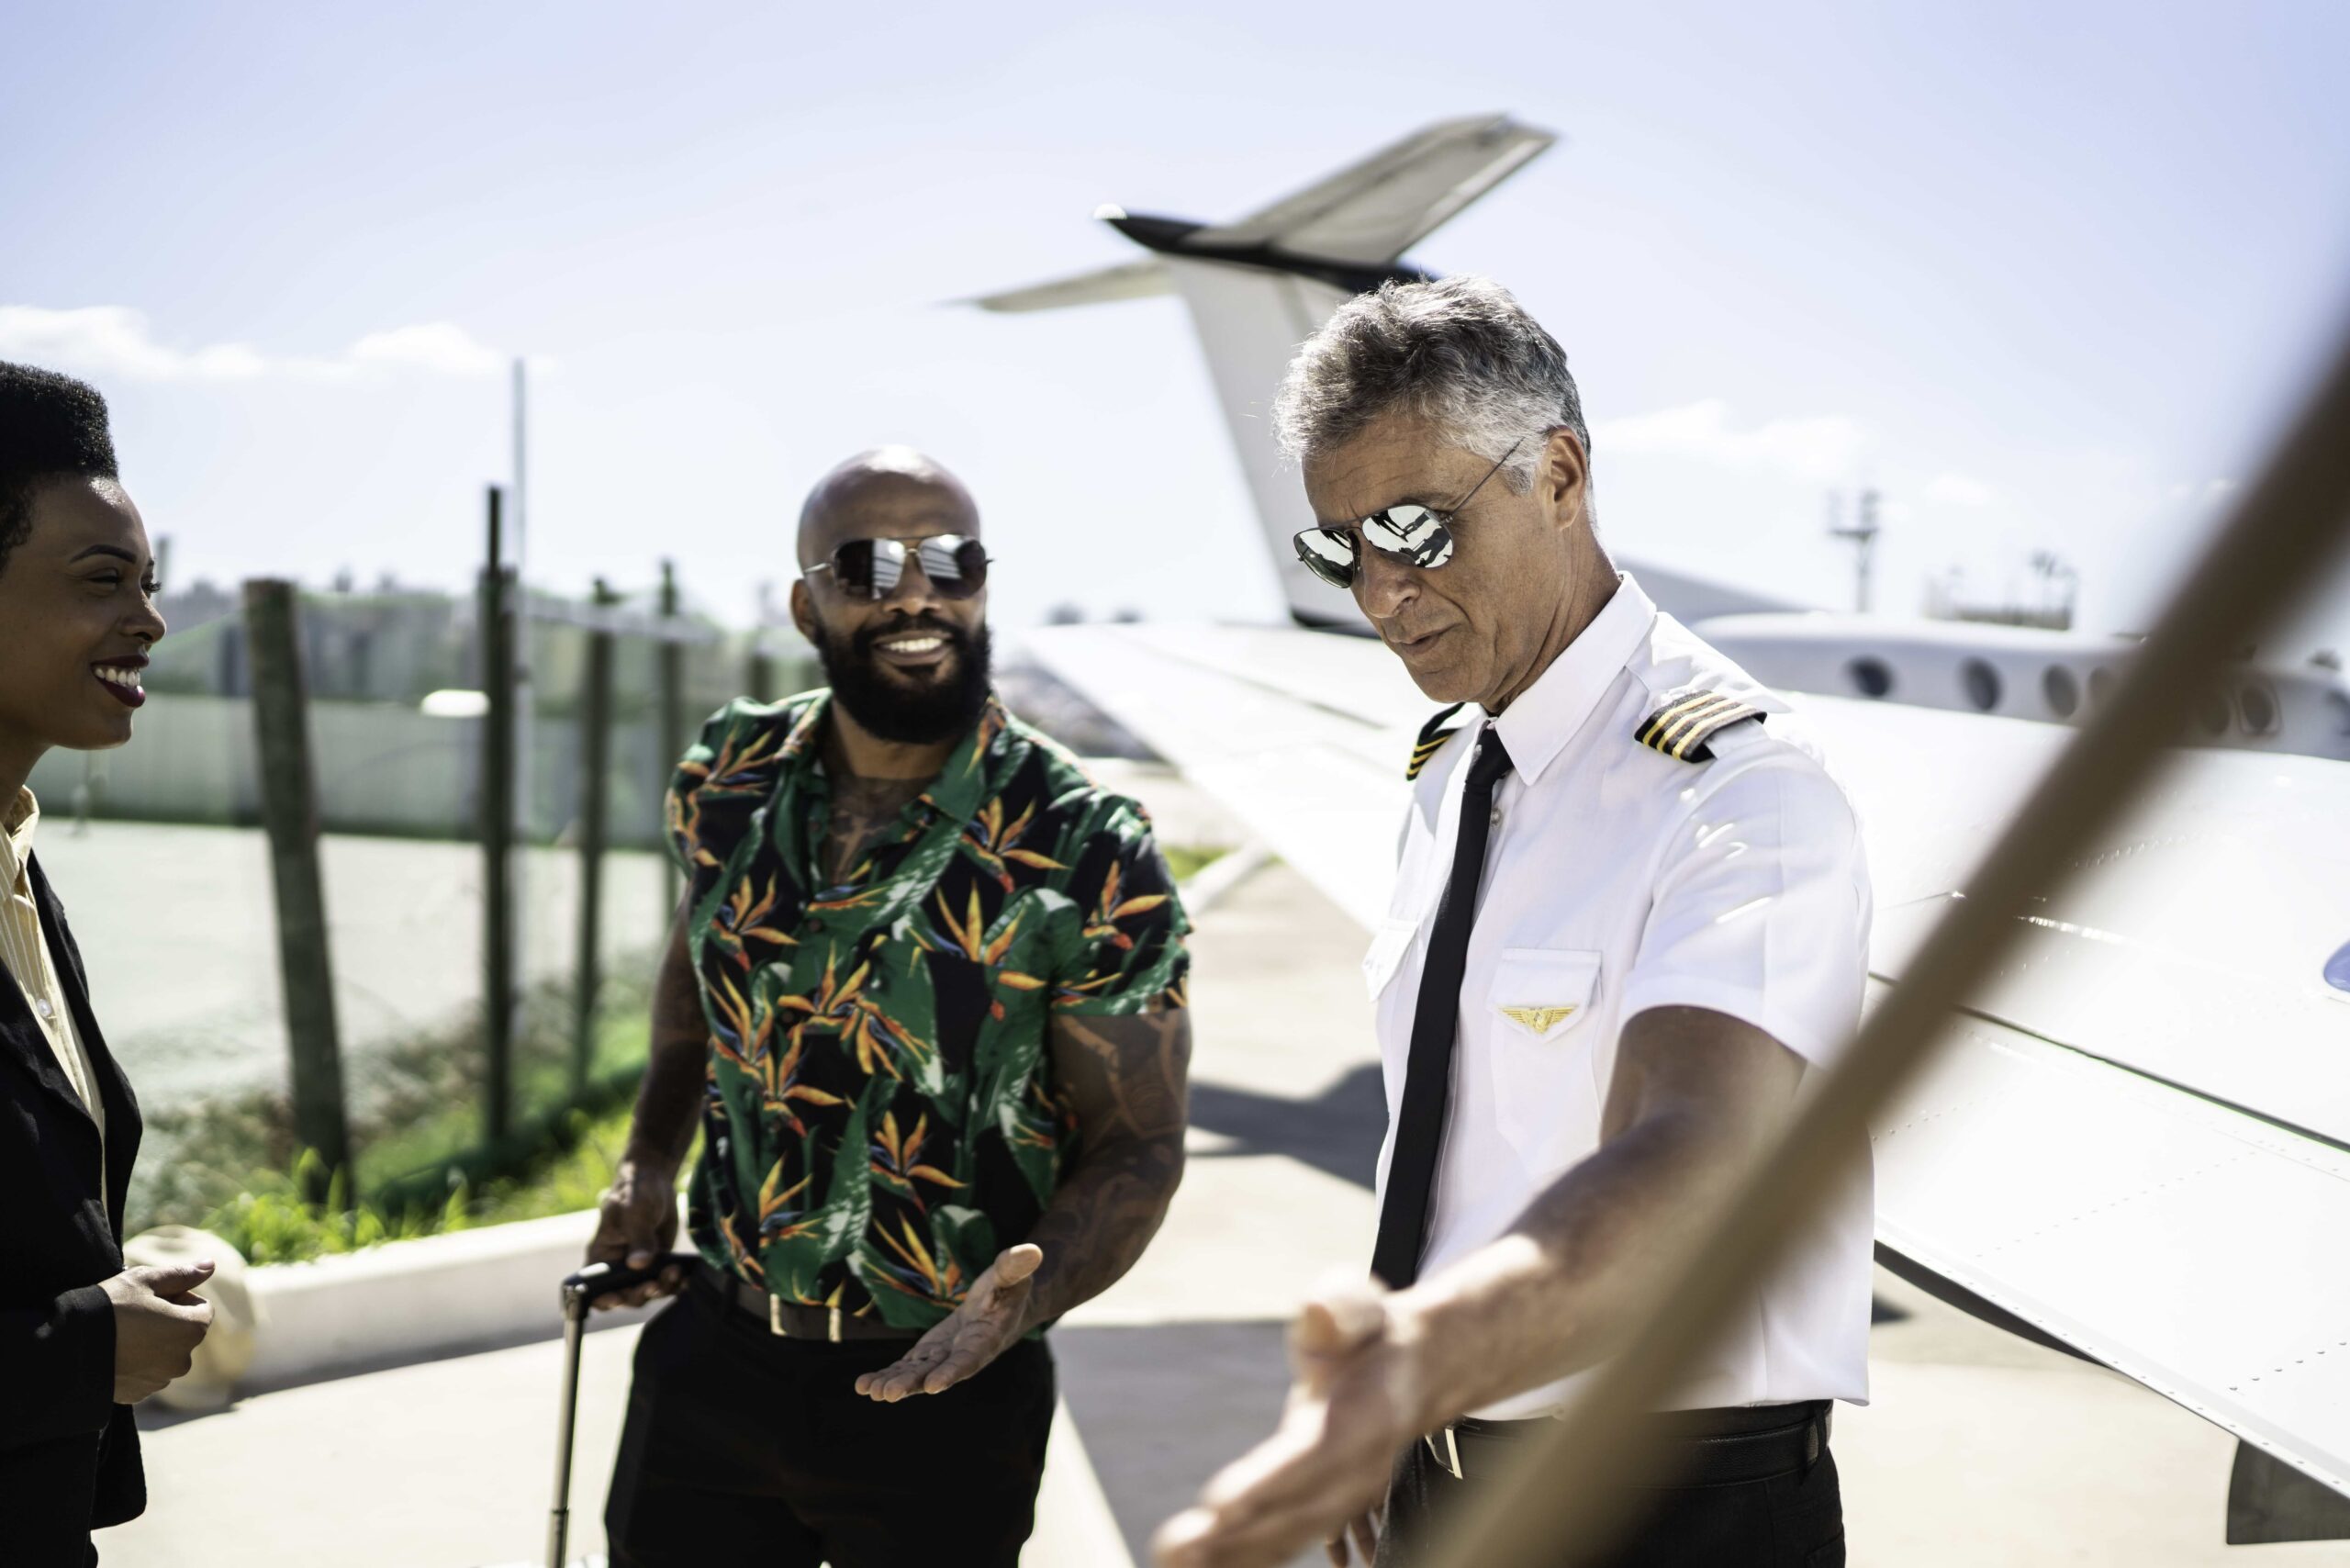 Two pilots on the airport